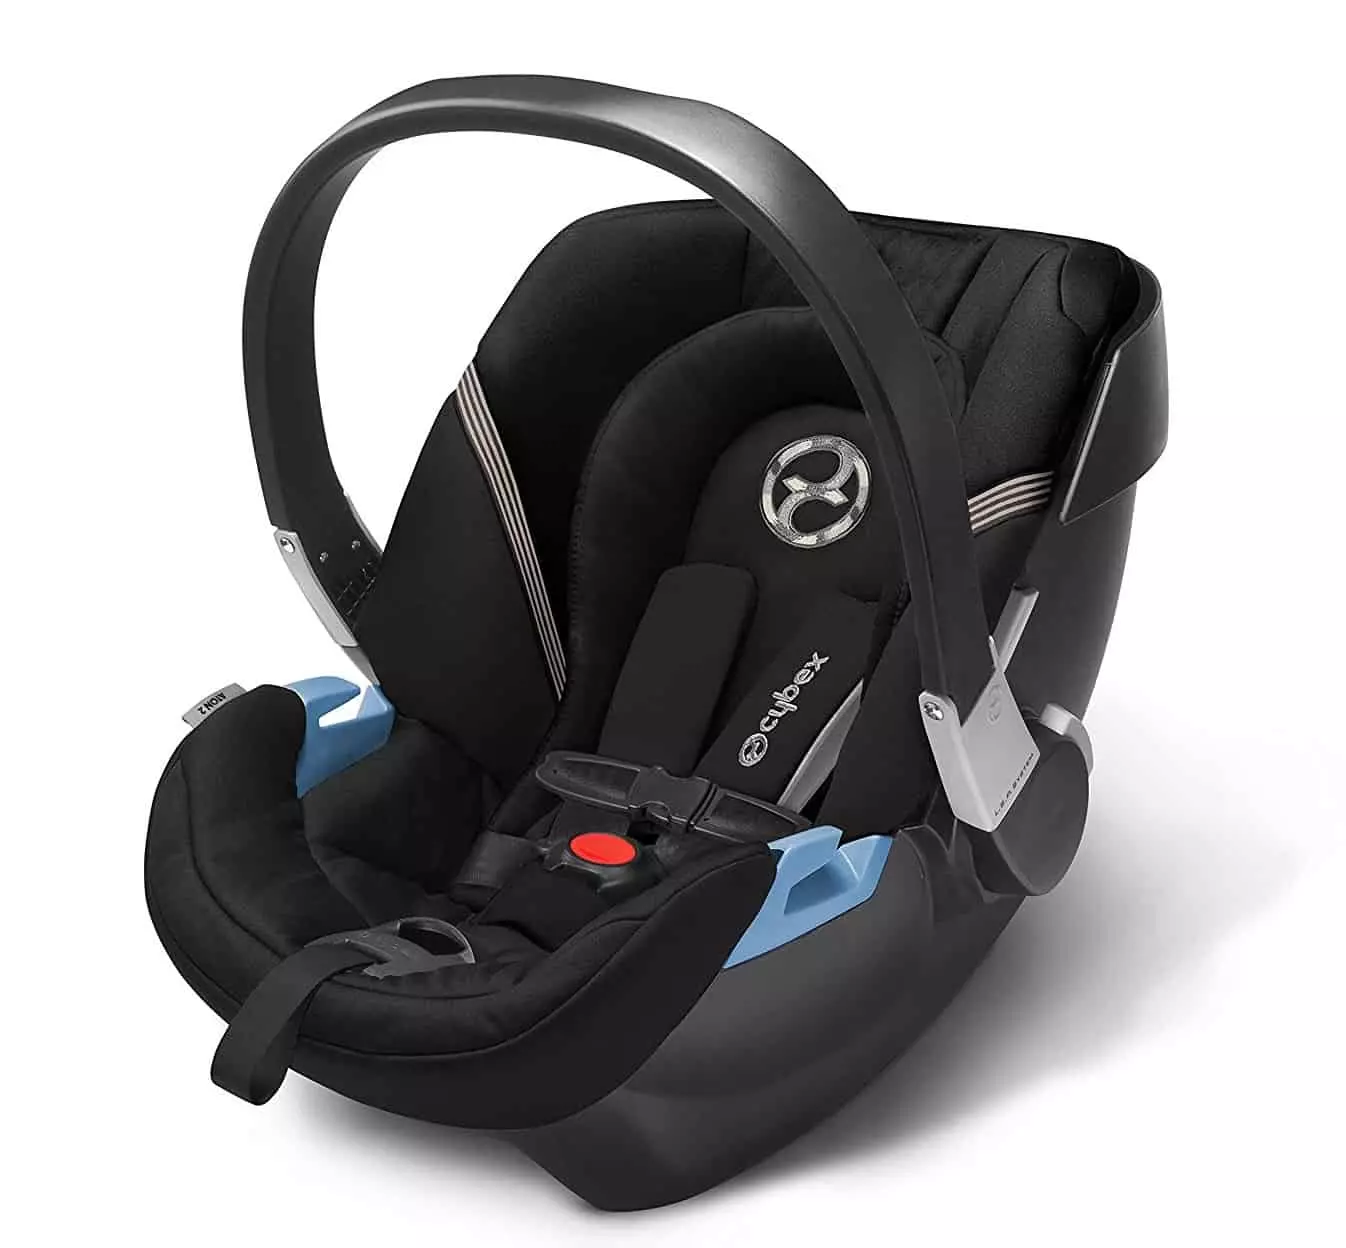 Cybex Aton 2 The Best Infant Car Seat